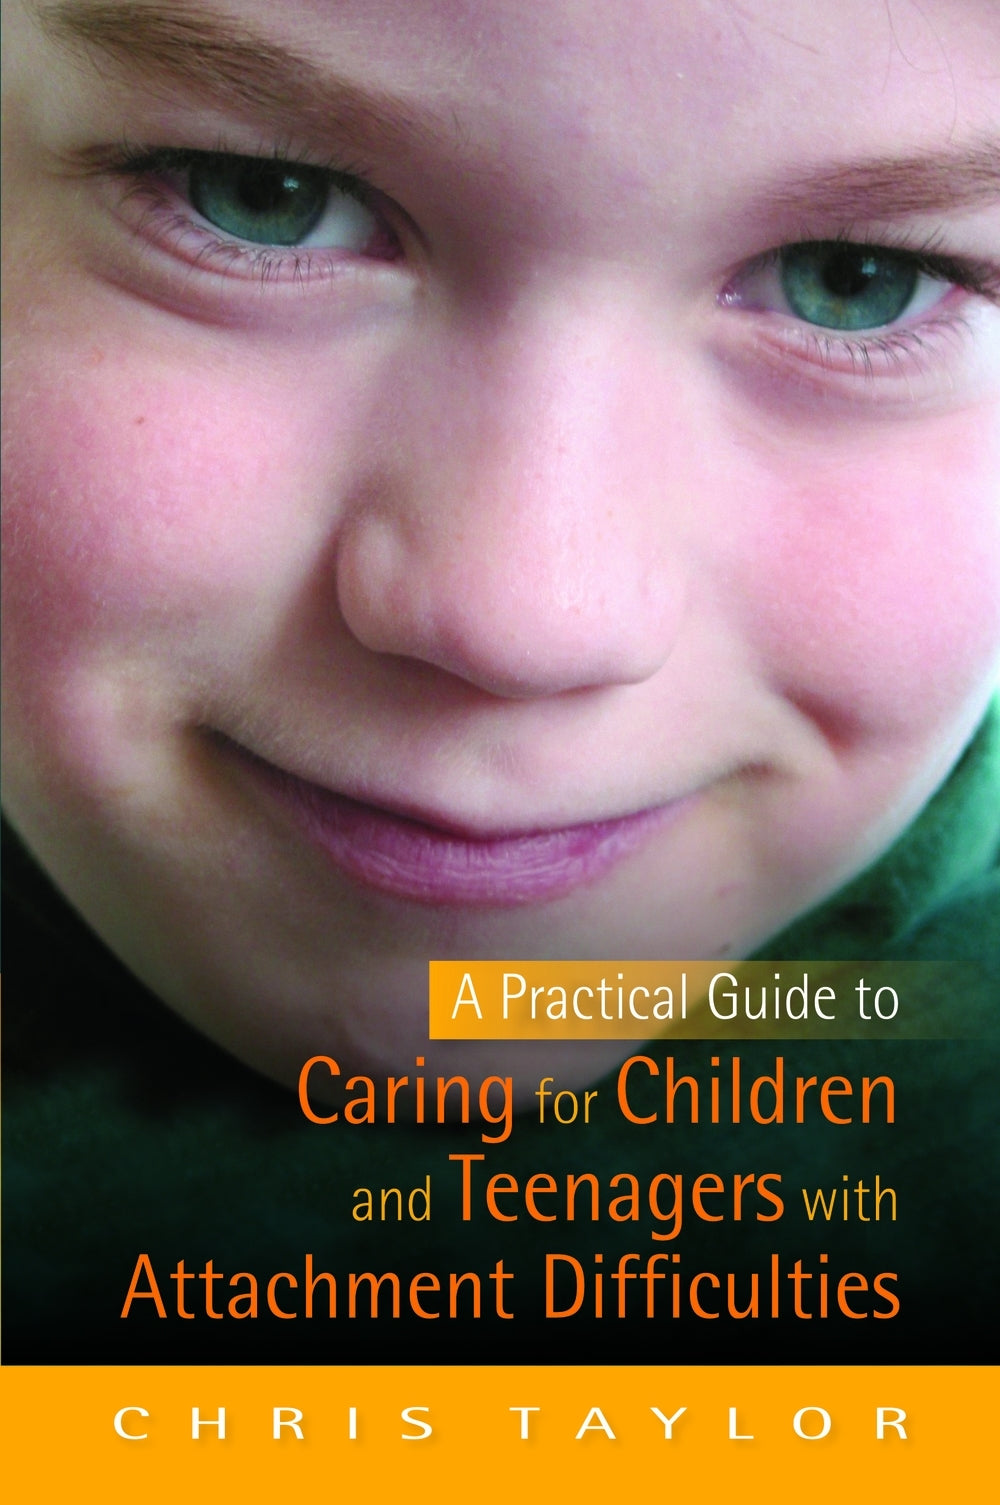 A Practical Guide to Caring for Children and Teenagers with Attachment Difficulties by Chris Taylor